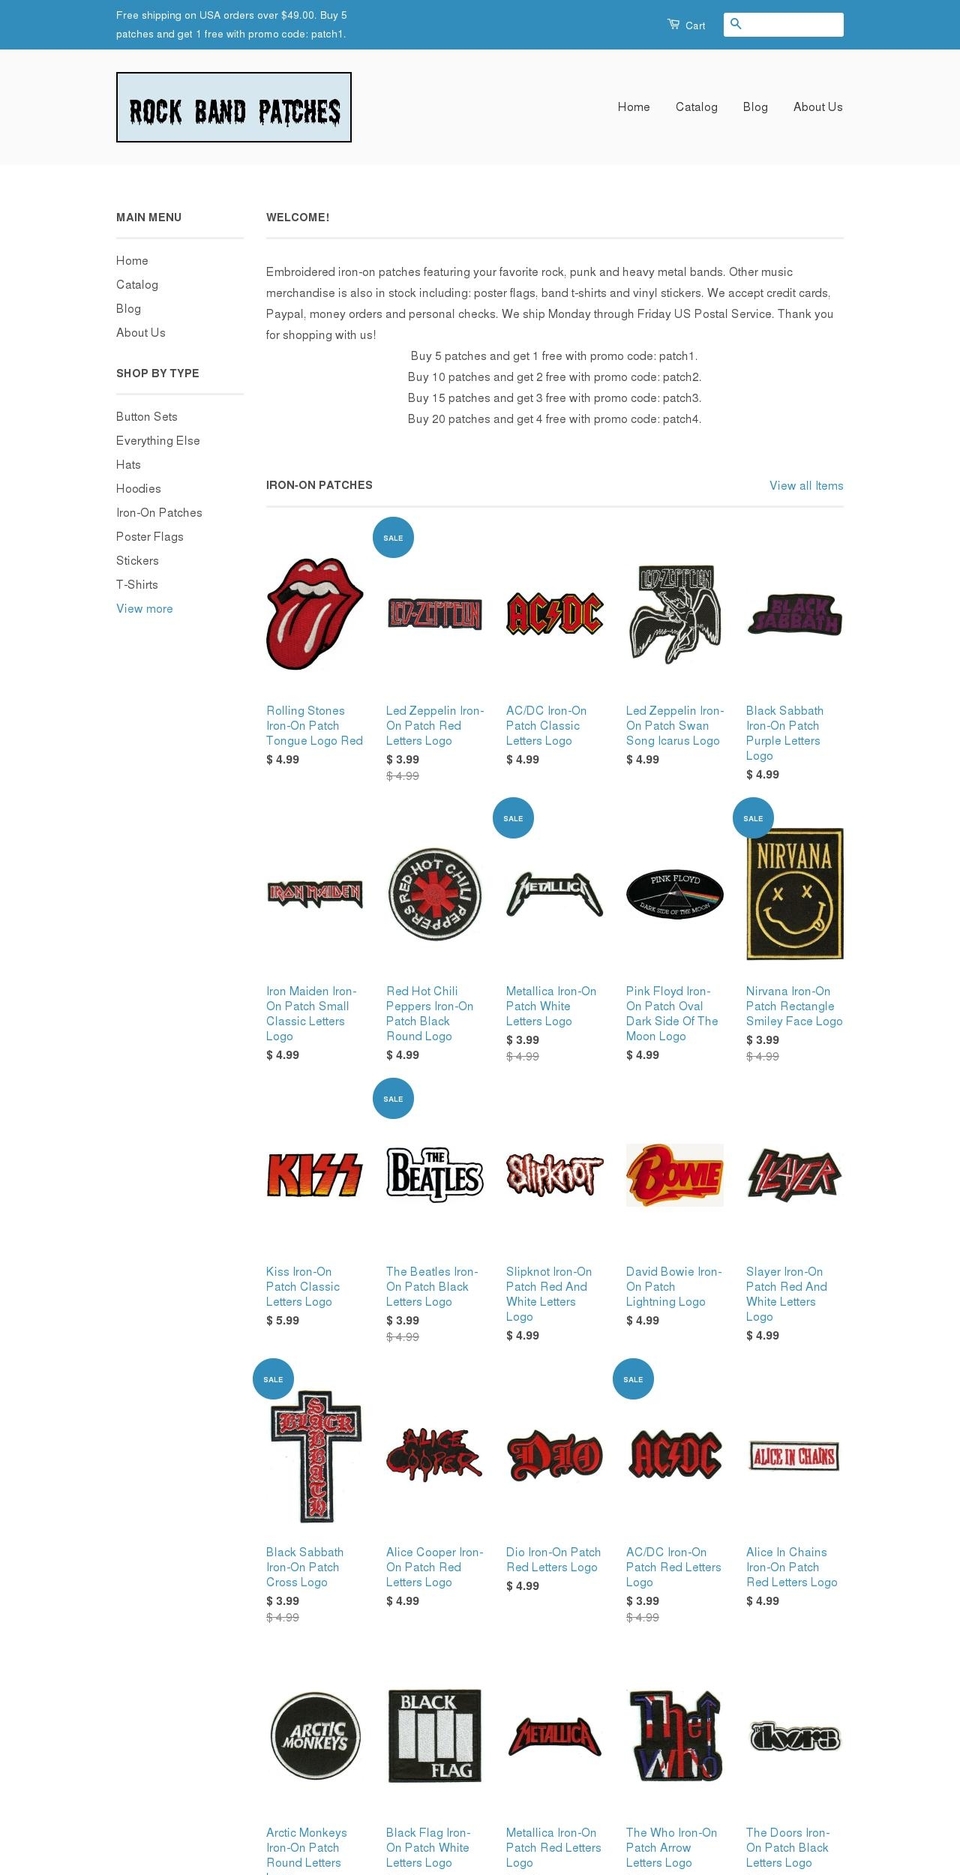 classic Shopify theme site example rockbandpatches.com